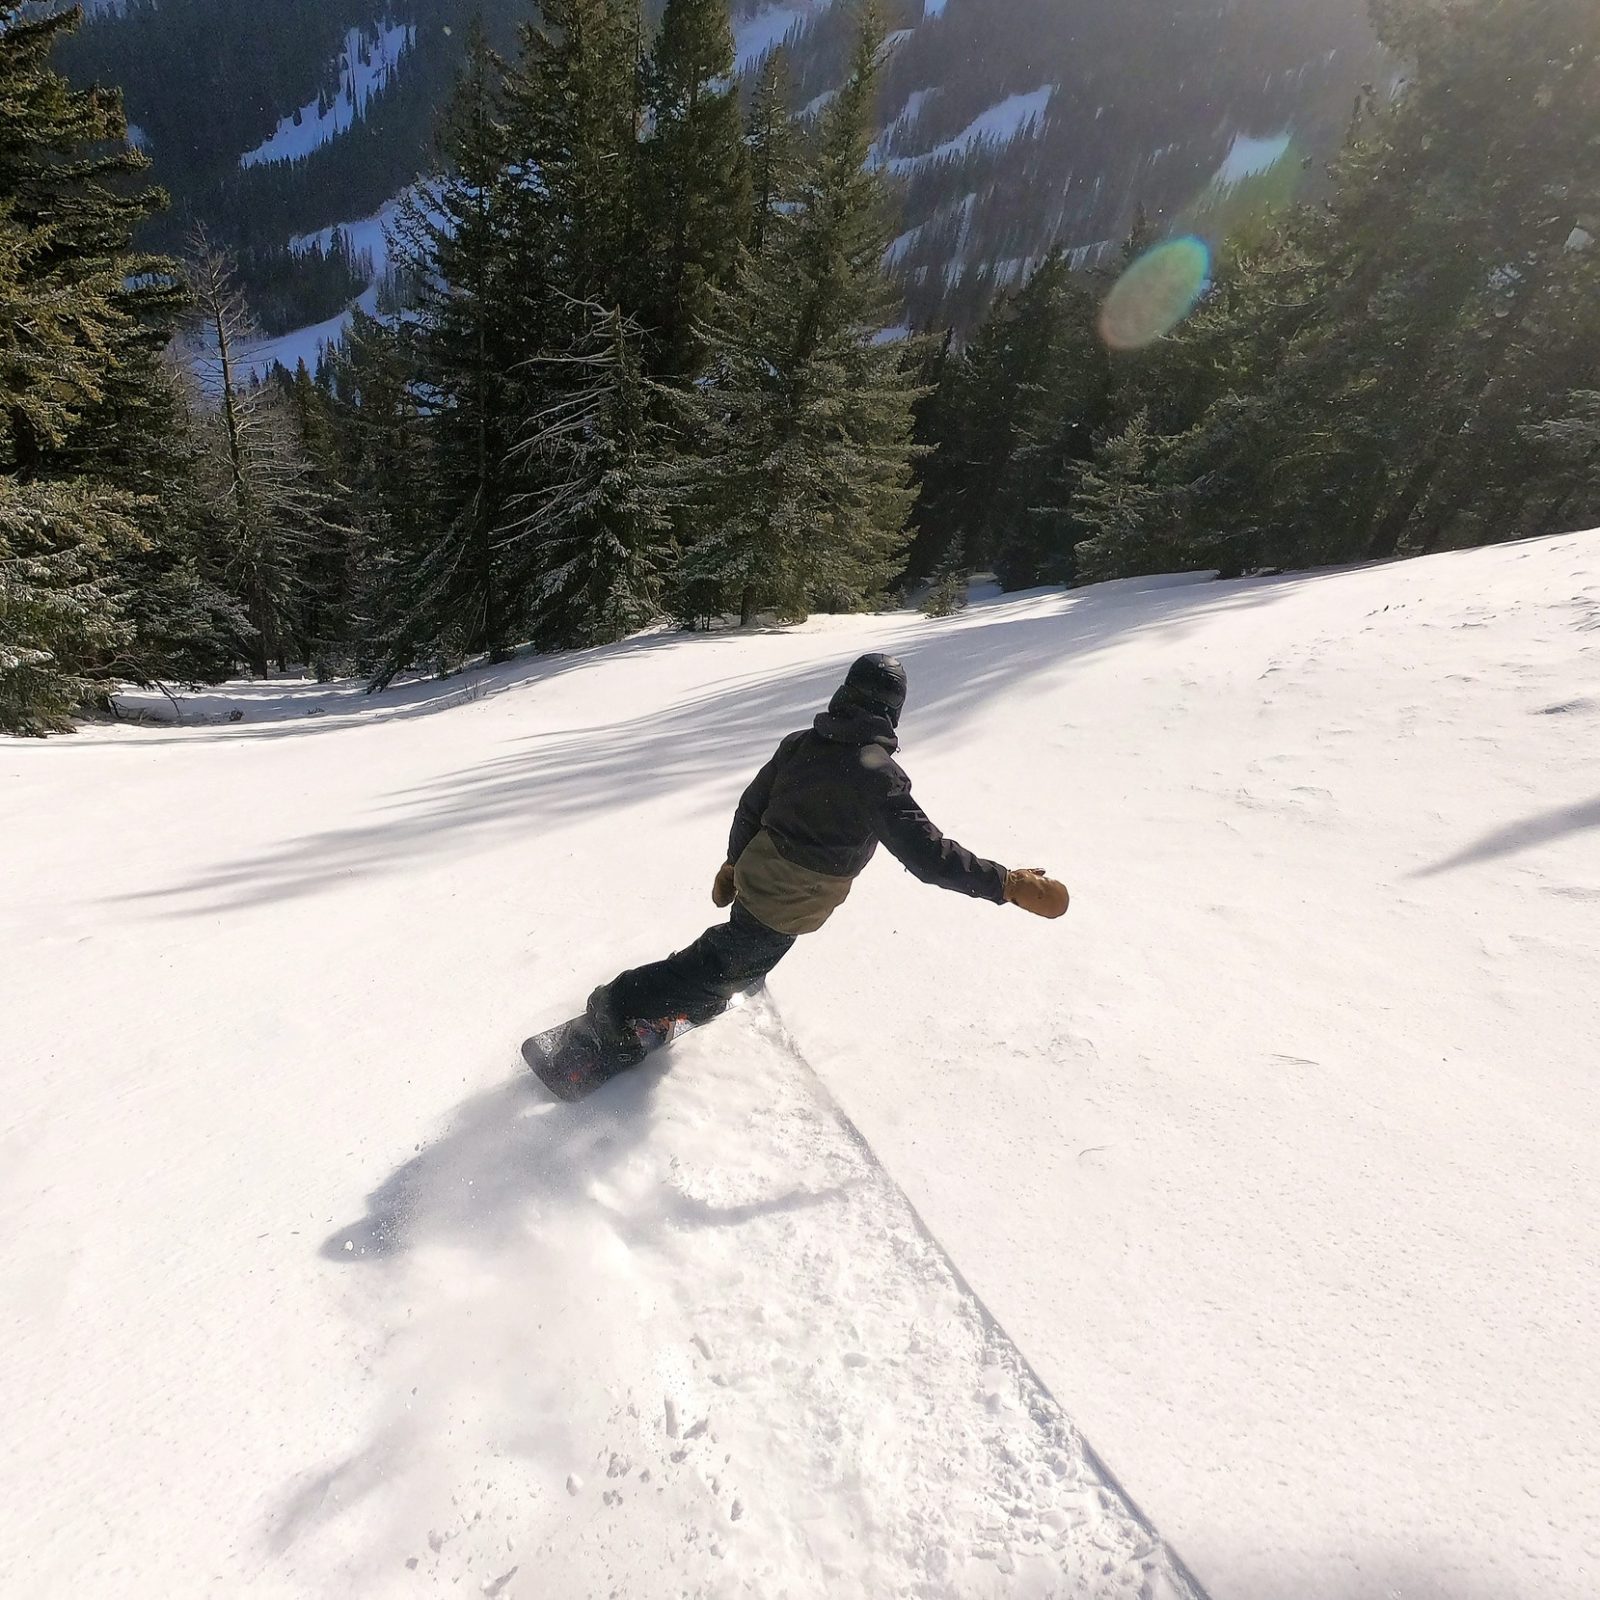 A snowboarder carving down the hill at Mission Ridge with trees in the background